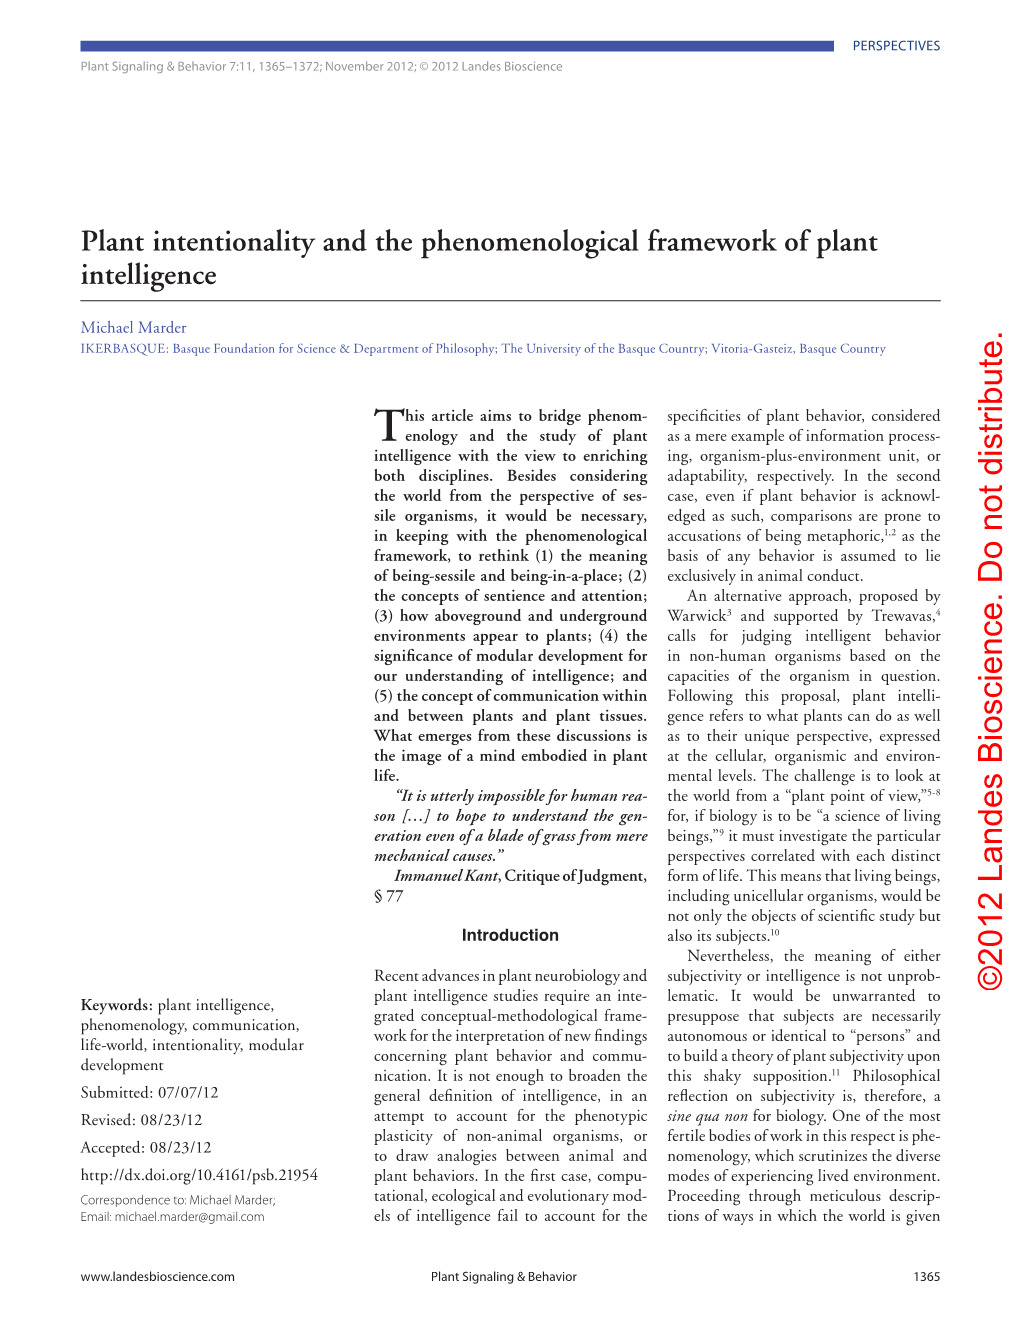 Plant Intentionality and the Phenomenological Framework Of